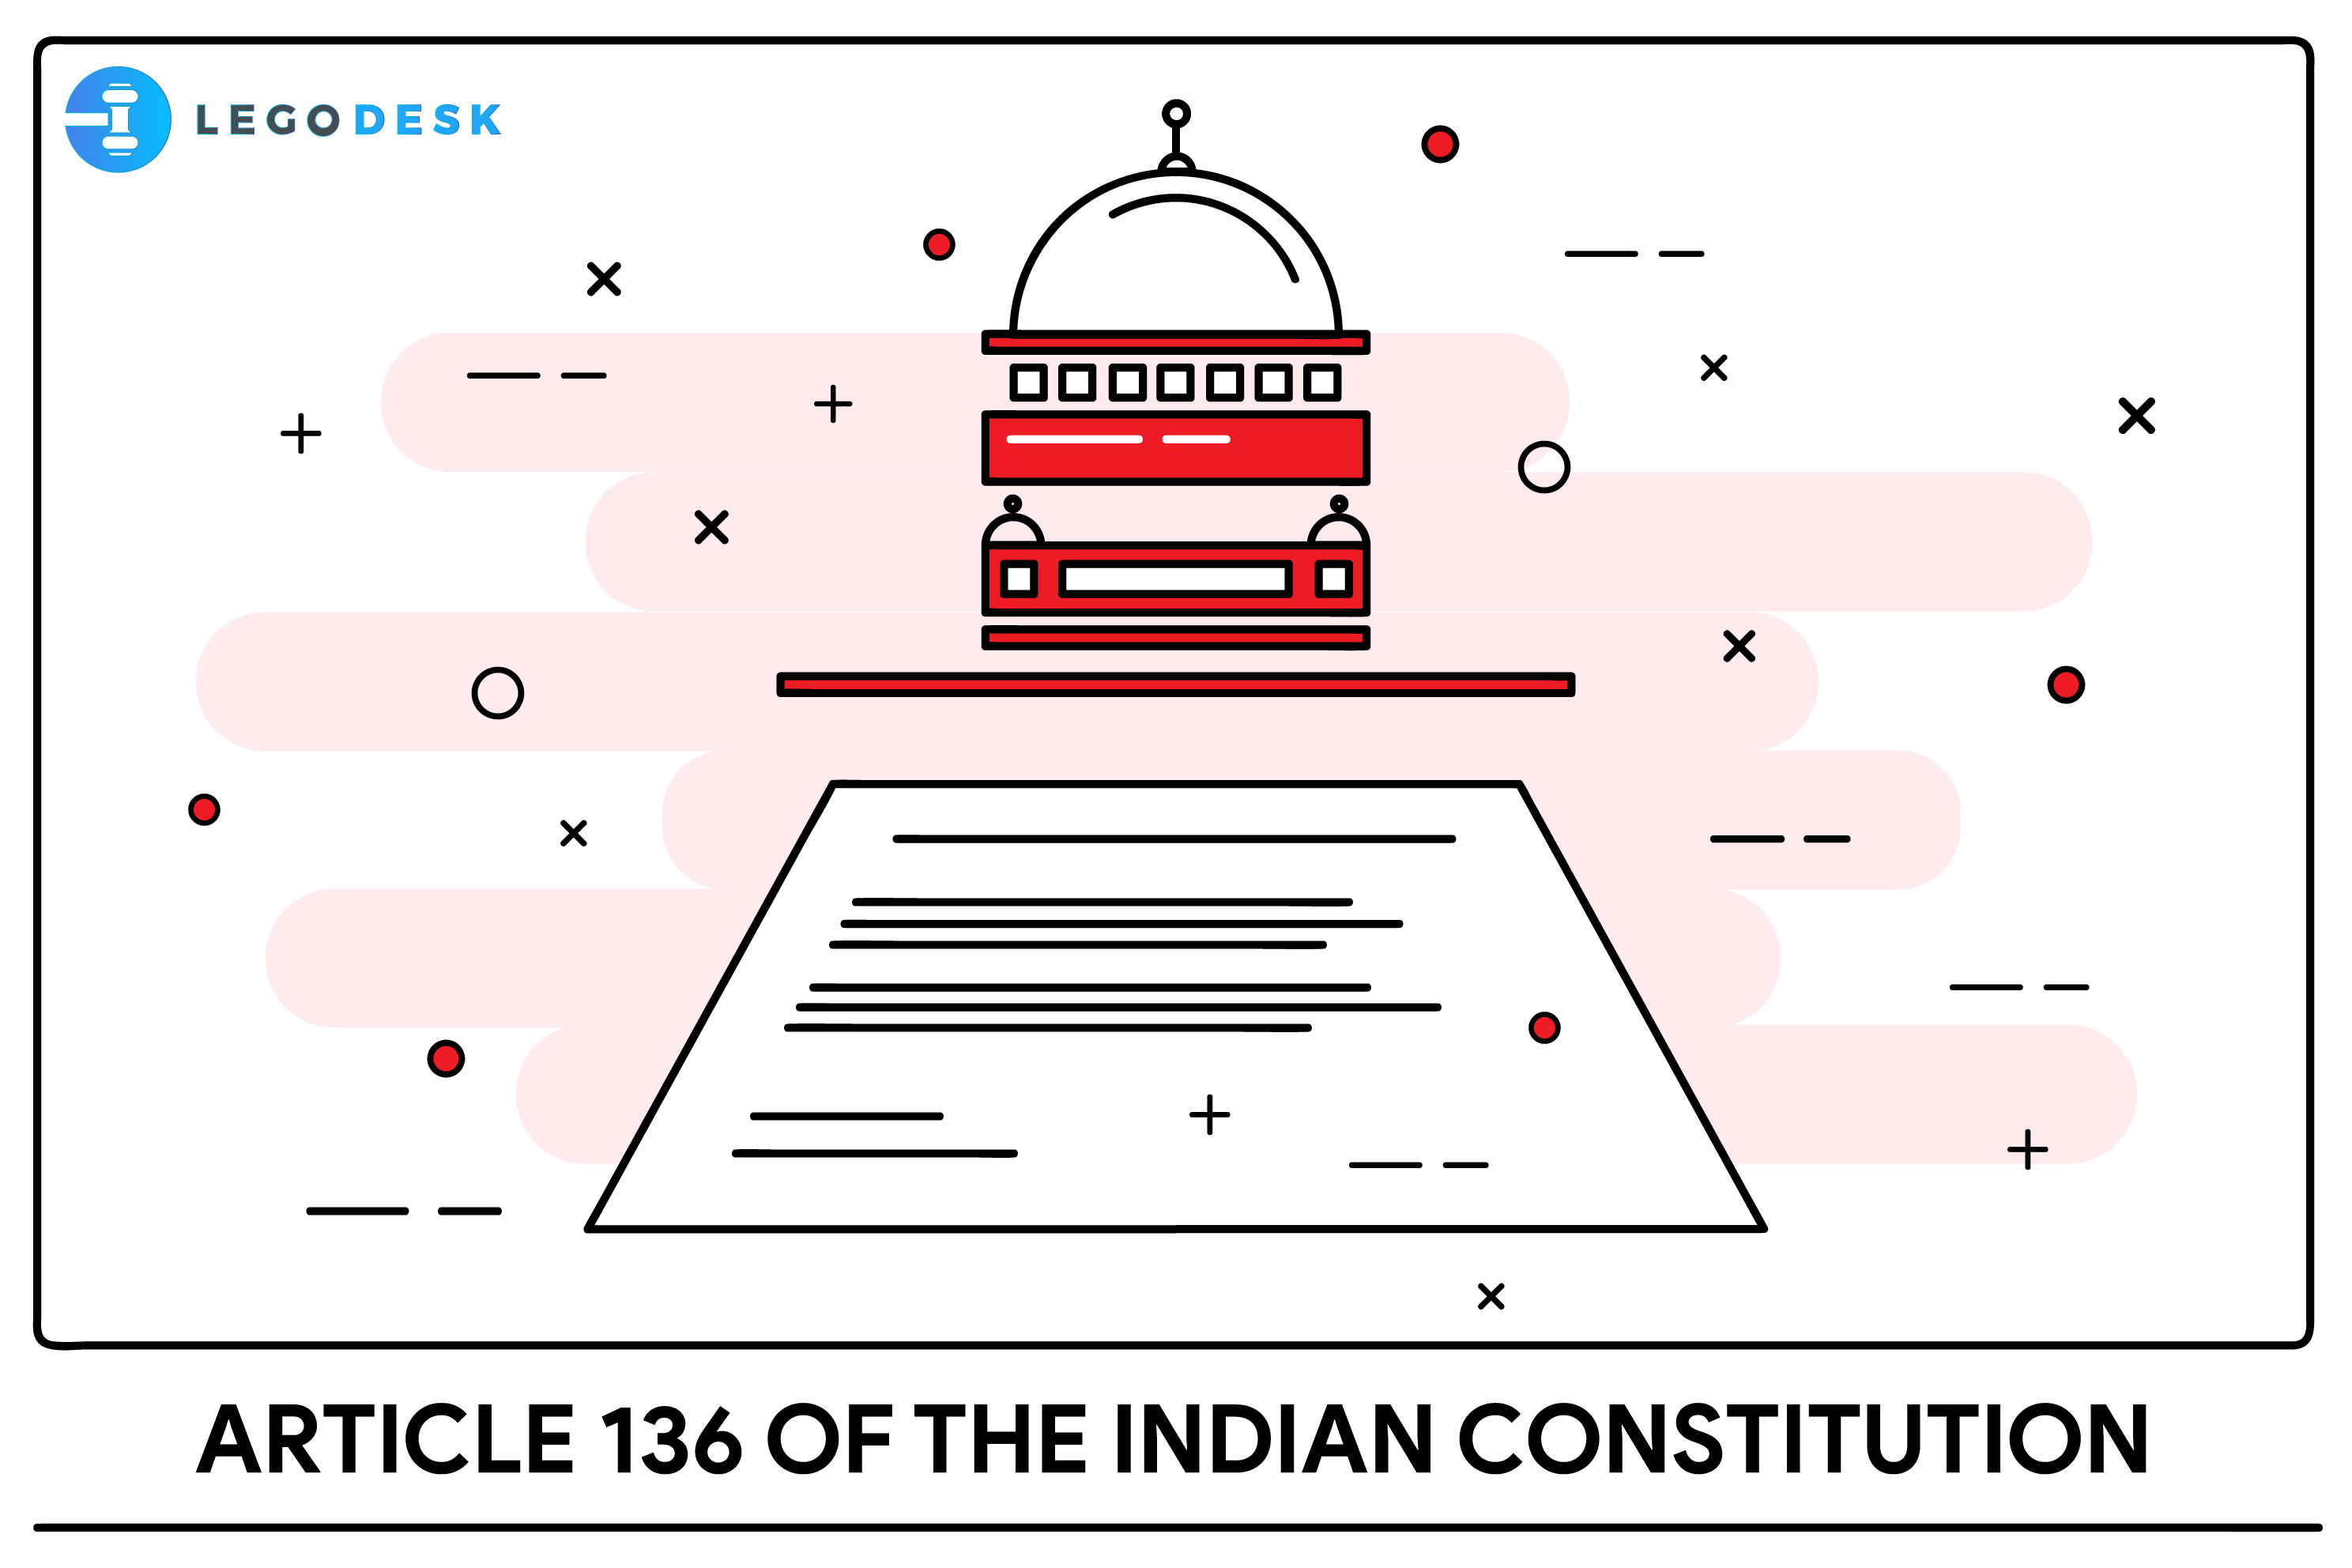 Article 136 of the Indian Constitution